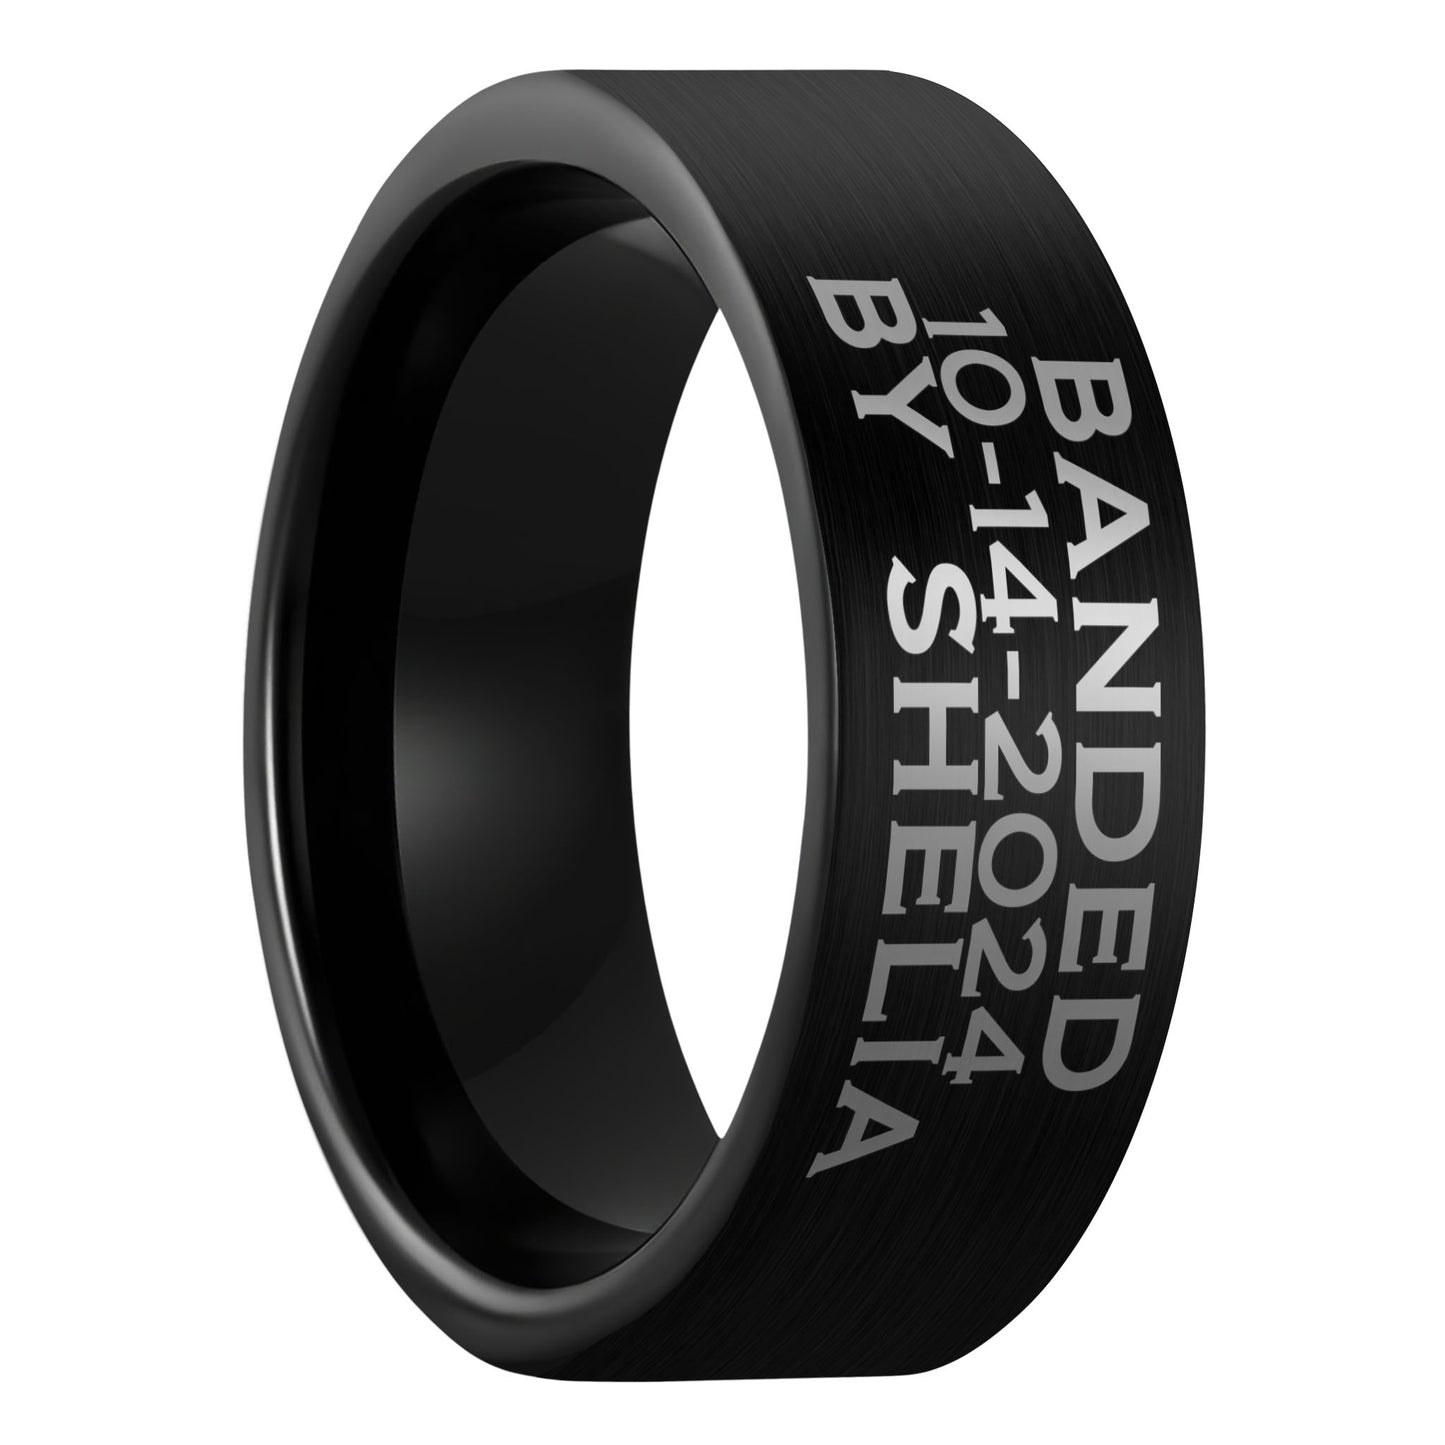 A duck band custom engraved brushed black tungsten men's wedding band displayed on a plain white background.